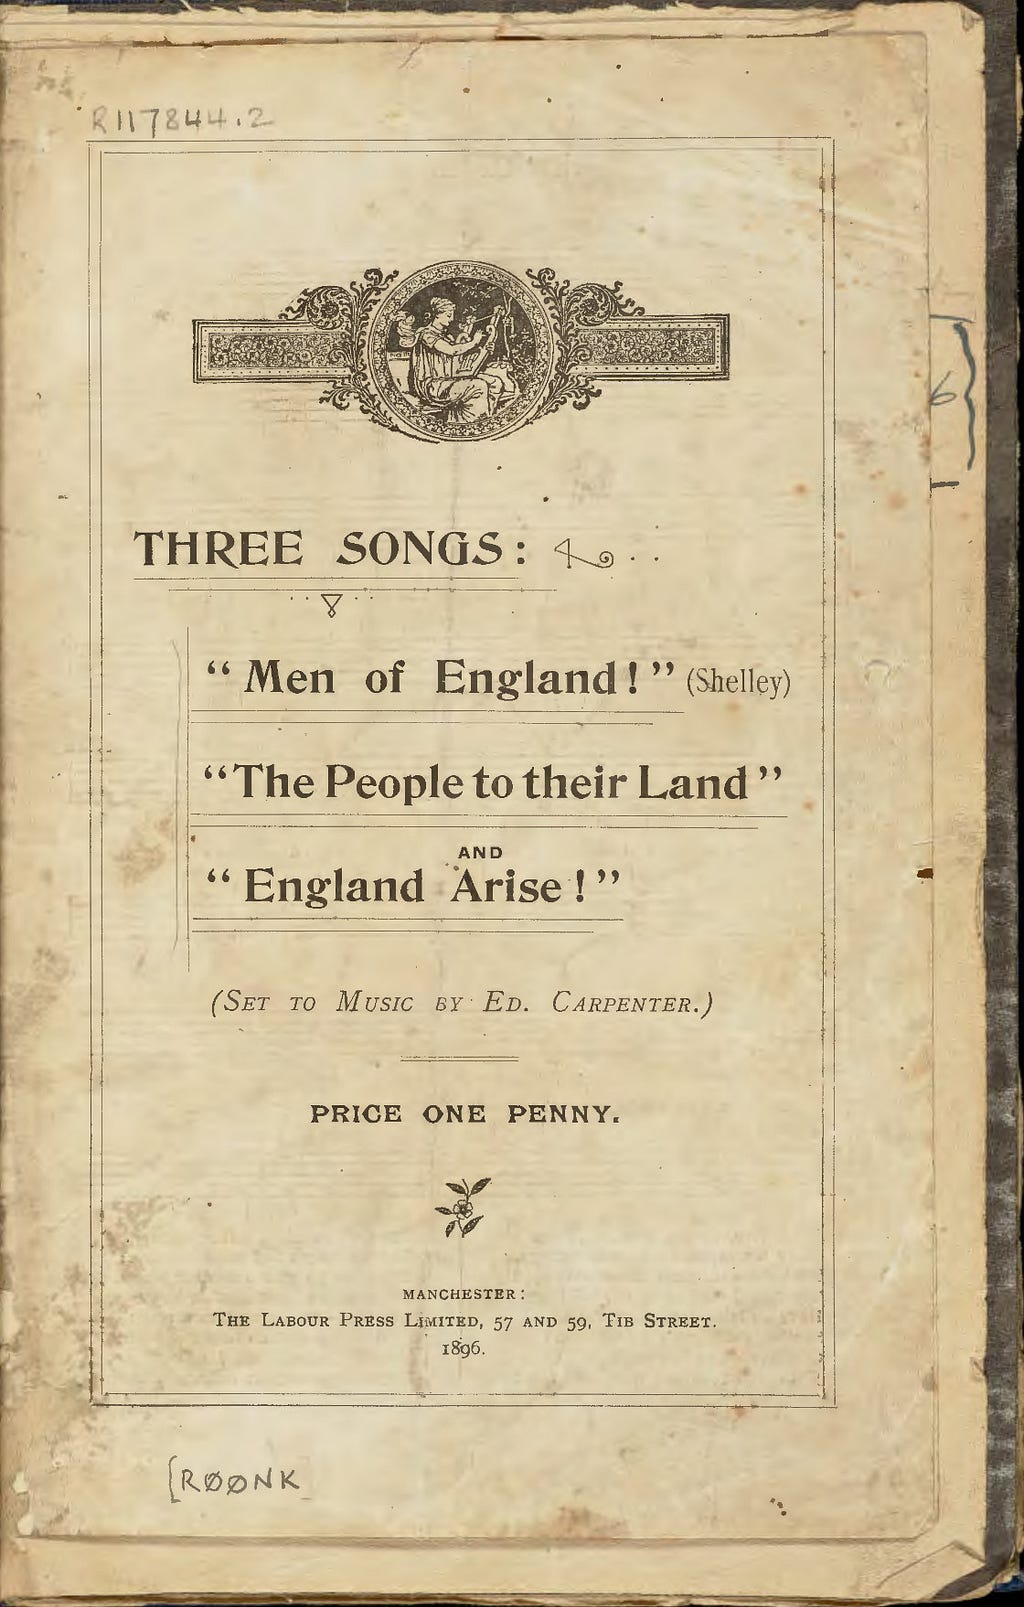 Cover page of a music score with the title ‘Three Songs; Men of England, the People to their Land and England Arise! Set to music by Edward Carpenter. Price one penny.